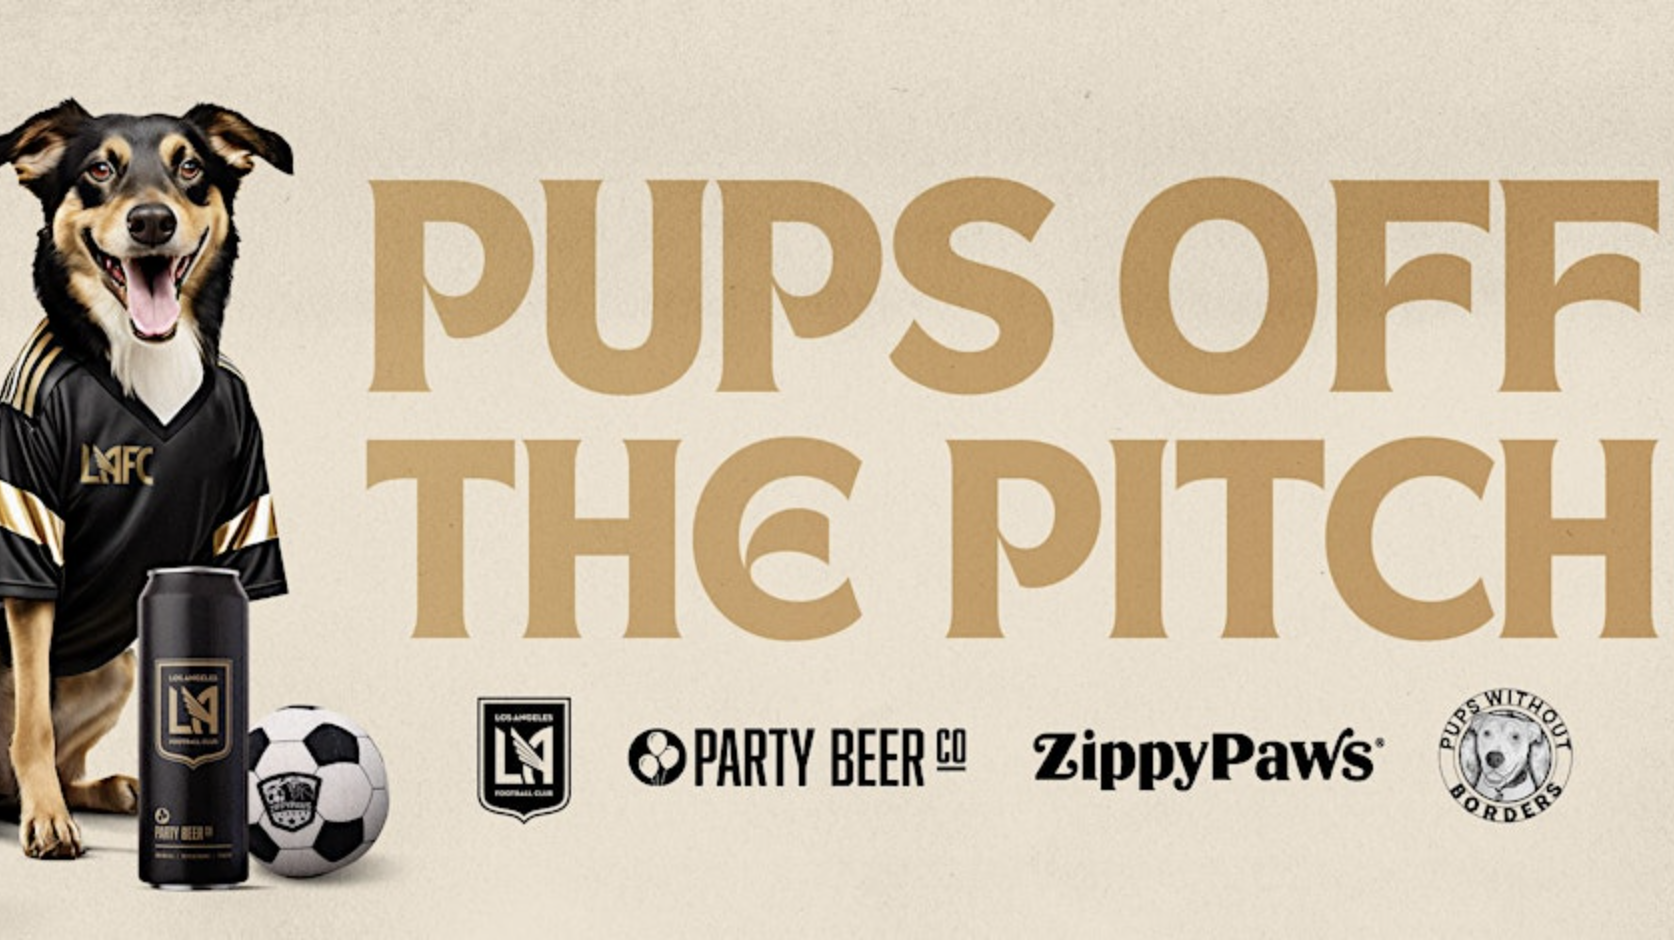 A dog in a black and gold LAFC jersey stands next to a beer can and a soccer ball. The image is titled "Pups Off The Pitch." Logos for LAFC, Party Beer Co, ZippyPaws, and Pups Without Borders are displayed below.